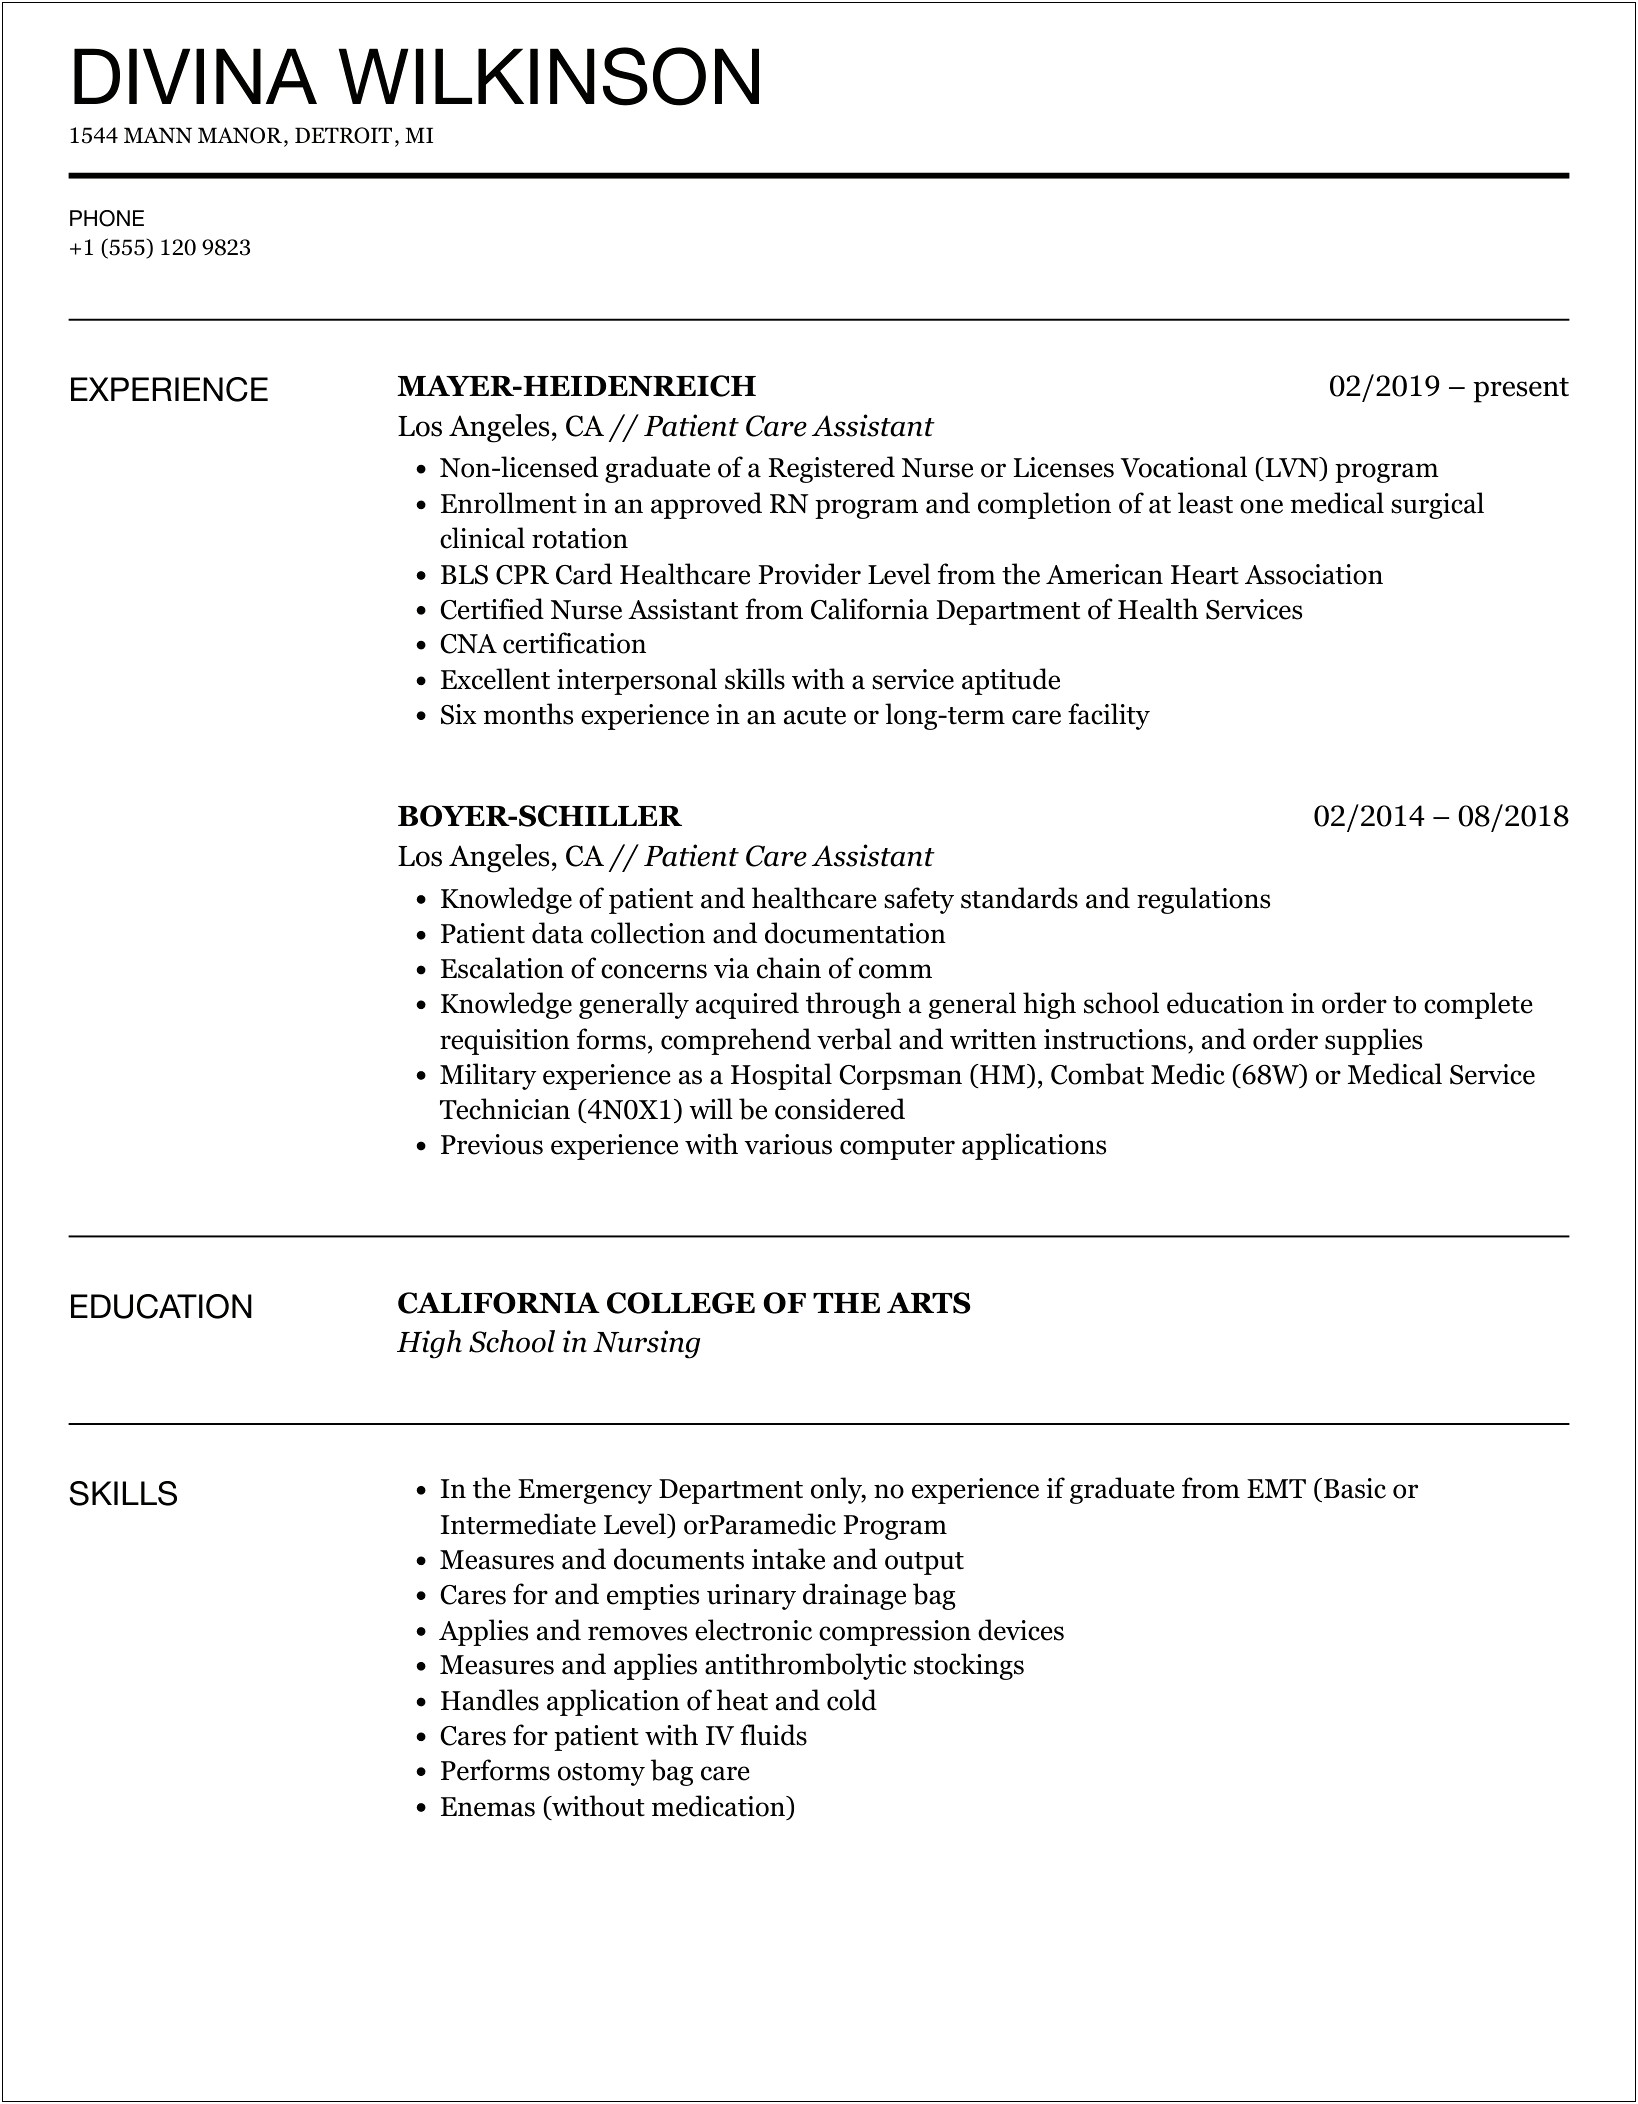 General Resume Objective Examples For Pca